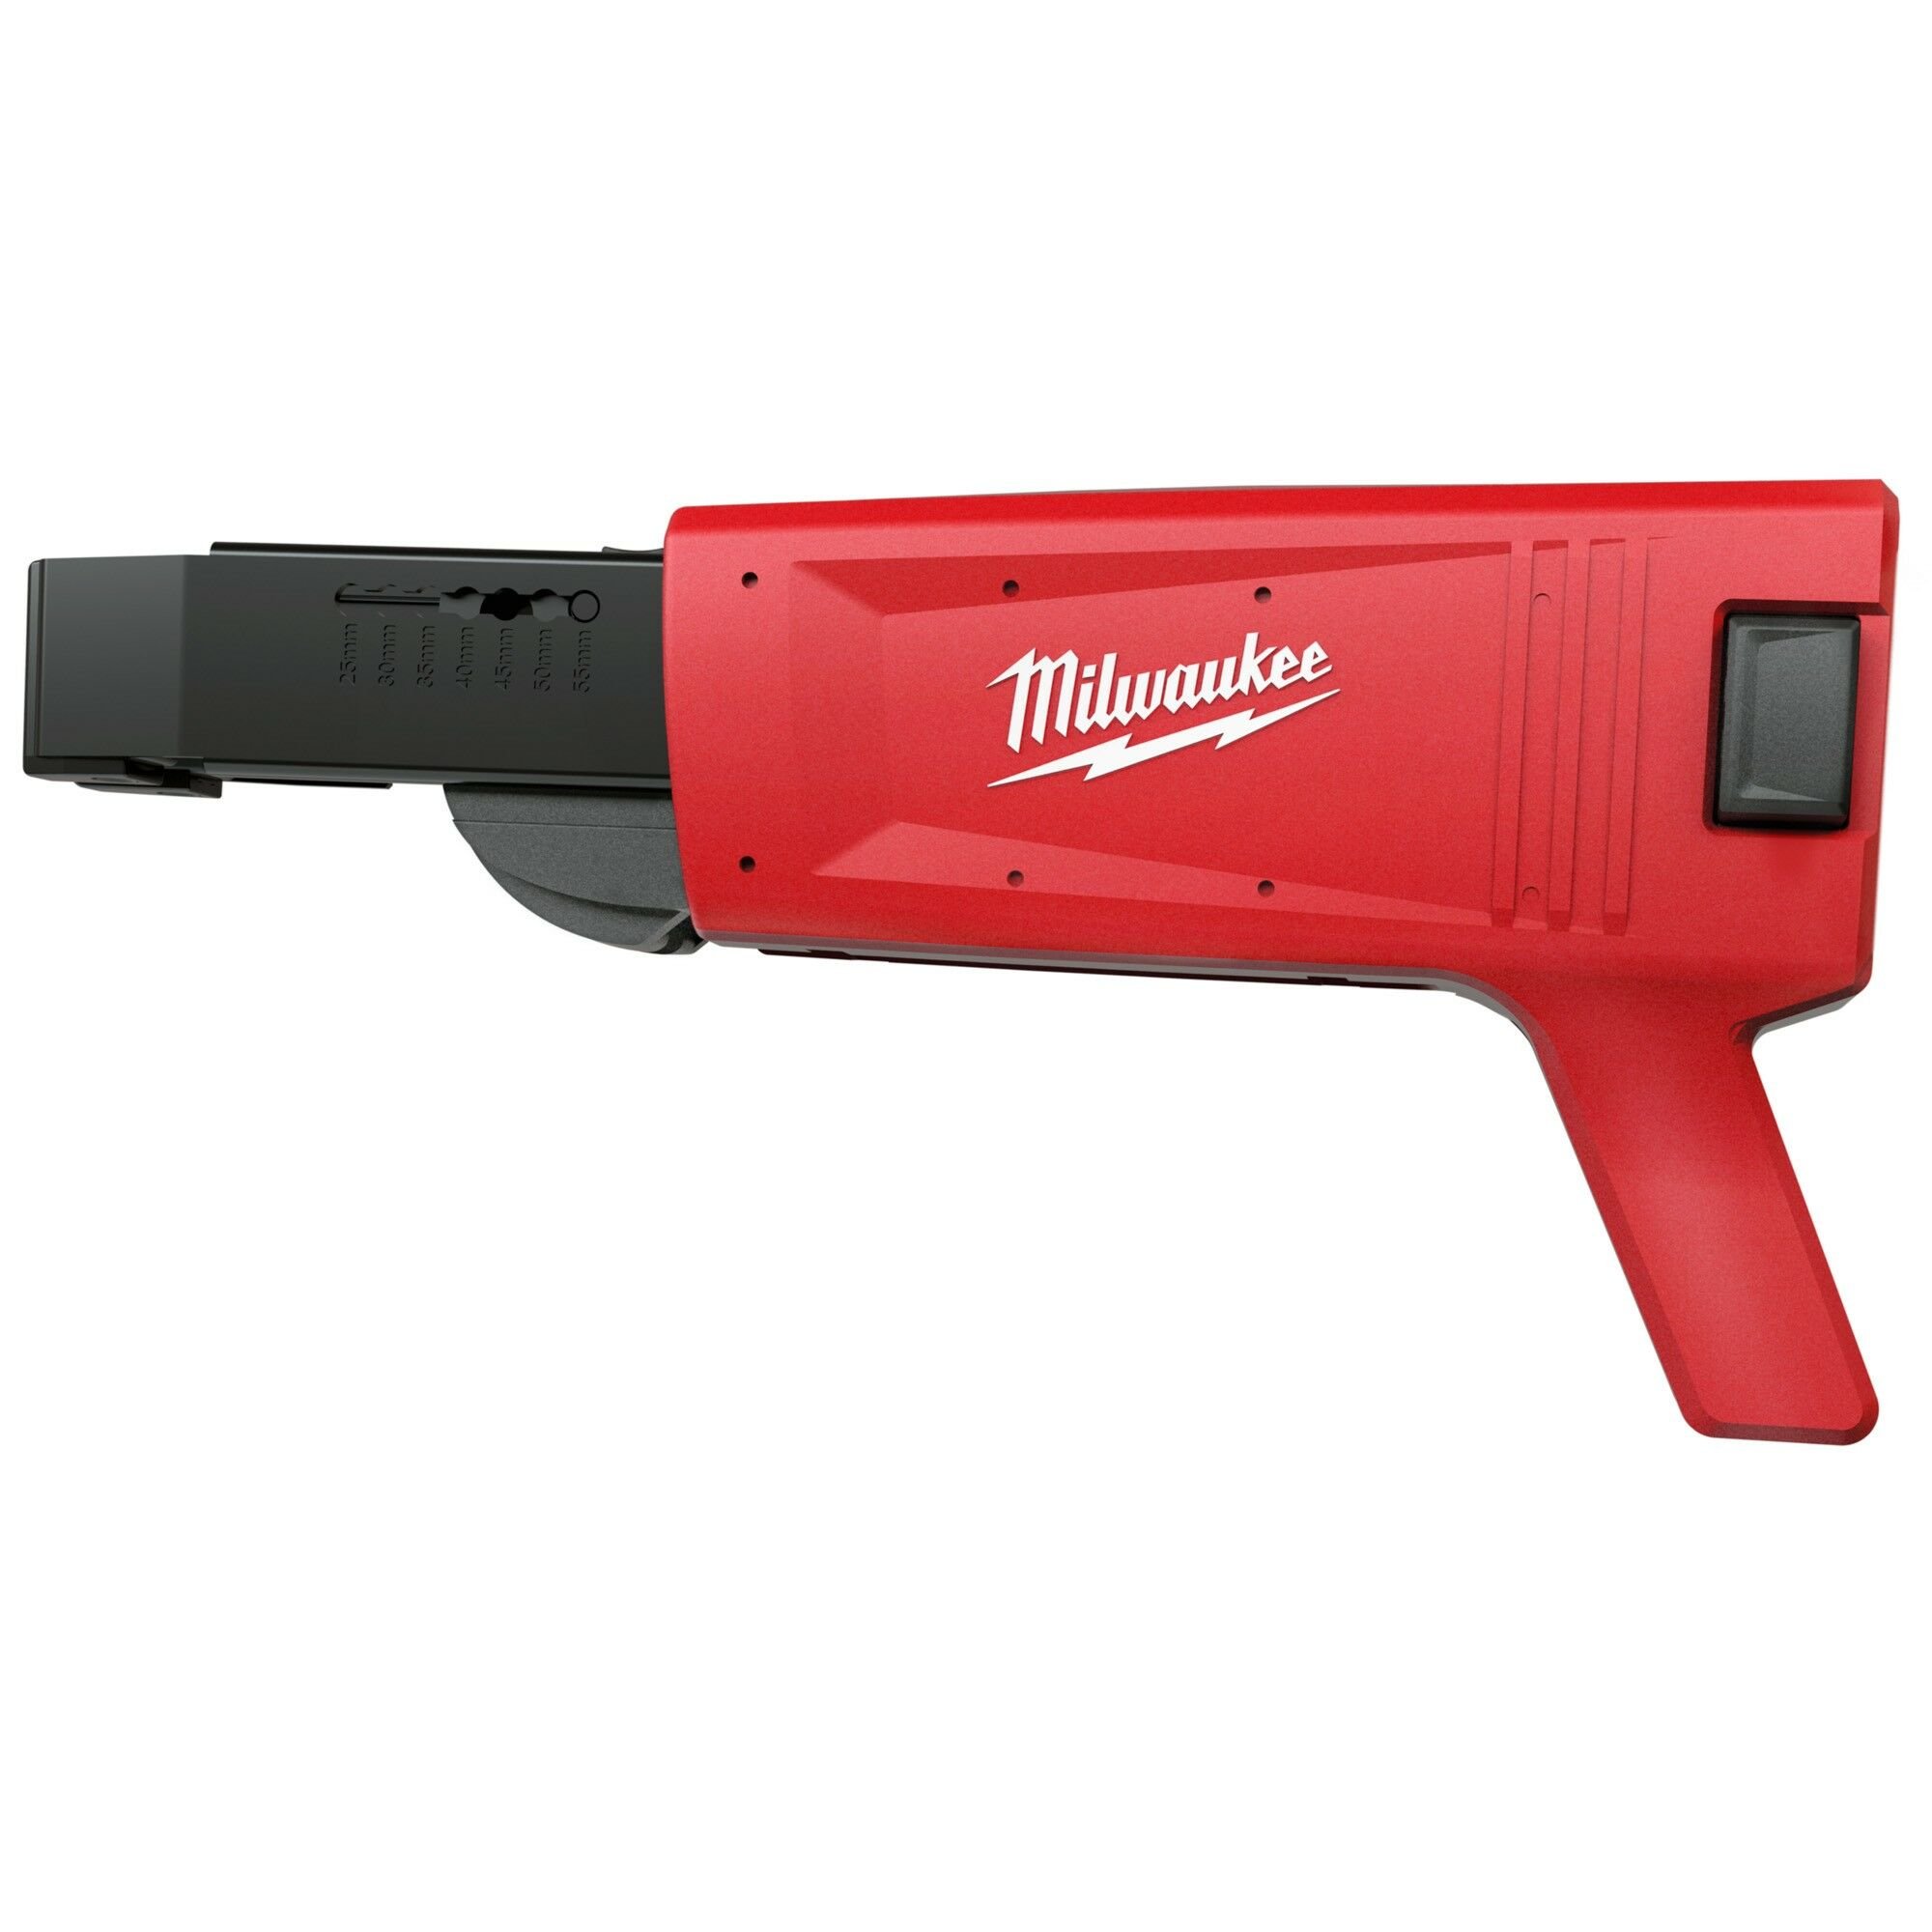 Milwaukee CA55 Collated Attachment for Drywall Screwgun